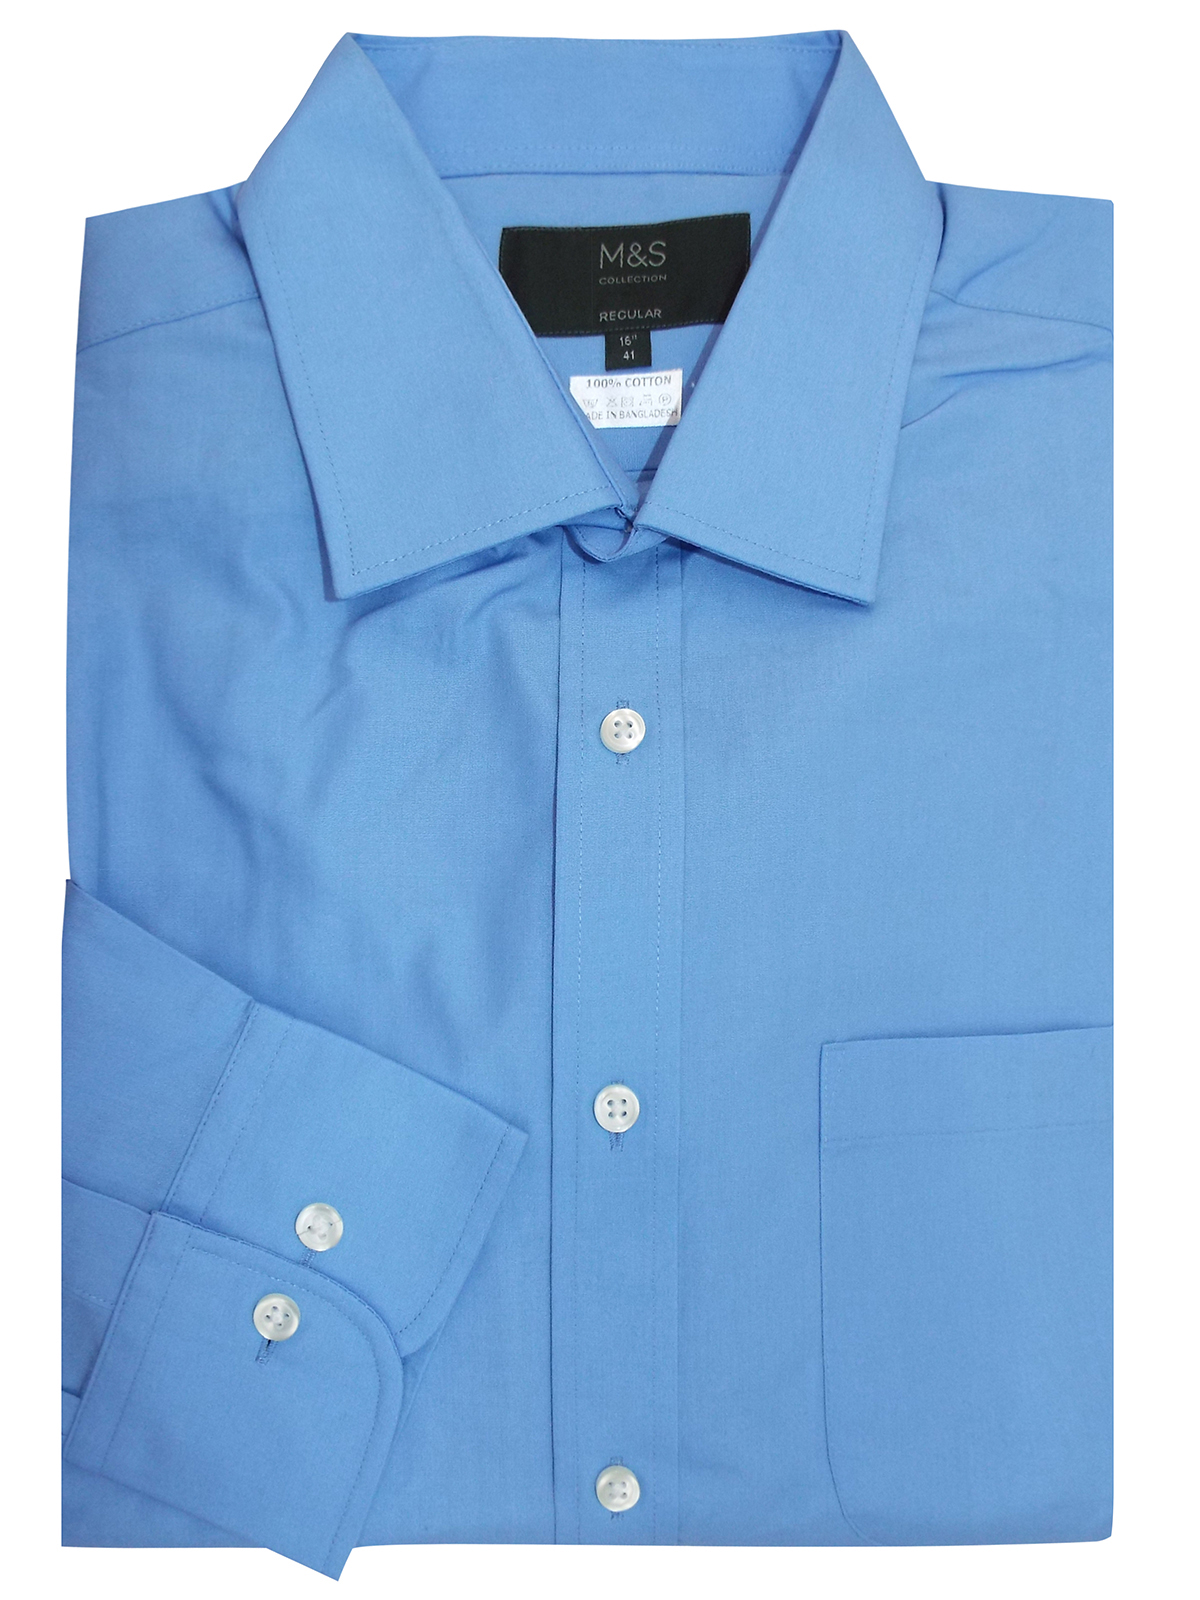 Marks and Spencer - - M&5 ASSORTED Pure Cotton Non Iron Shirt - Collar ...